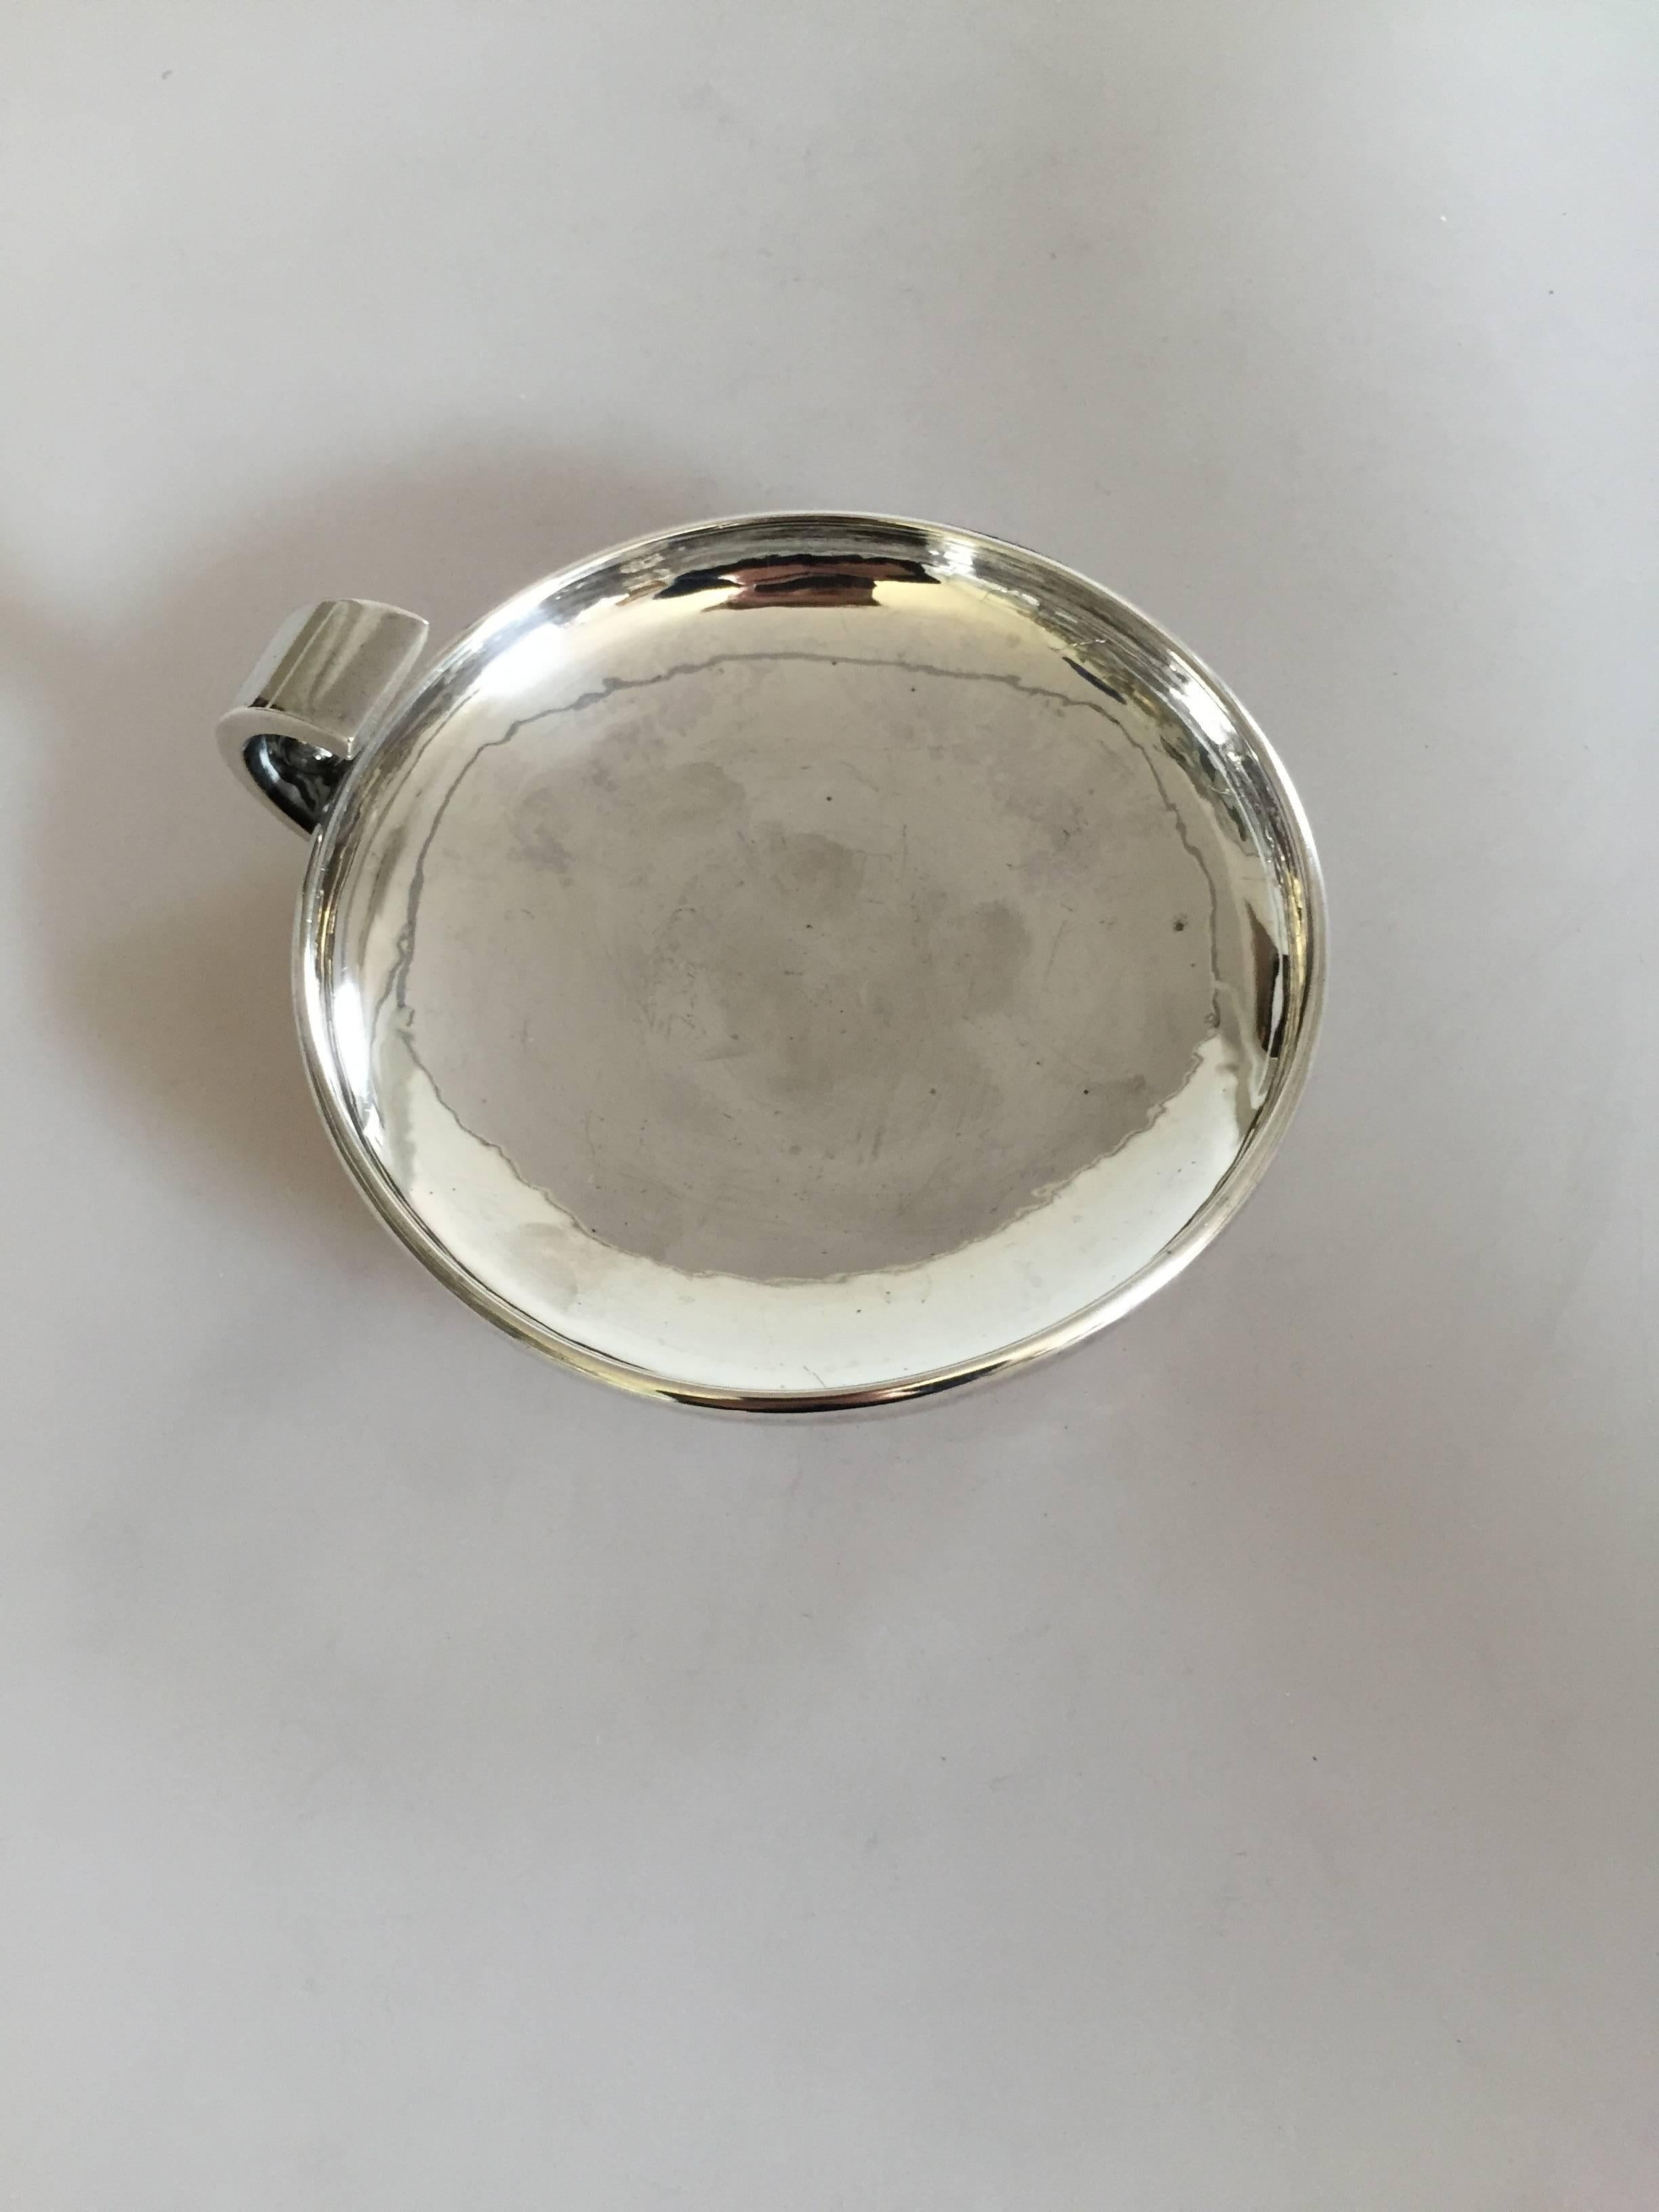 Hans Hansen sterling silver decorative bowl/dish #143 designed by Karl Gustav Hansen. It measures 13.5 cm in diameter and is in a good condition.

Hans Hansen (1884-1940) was a Danish silversmithy. He opened his own smithy and shop in Kolding,